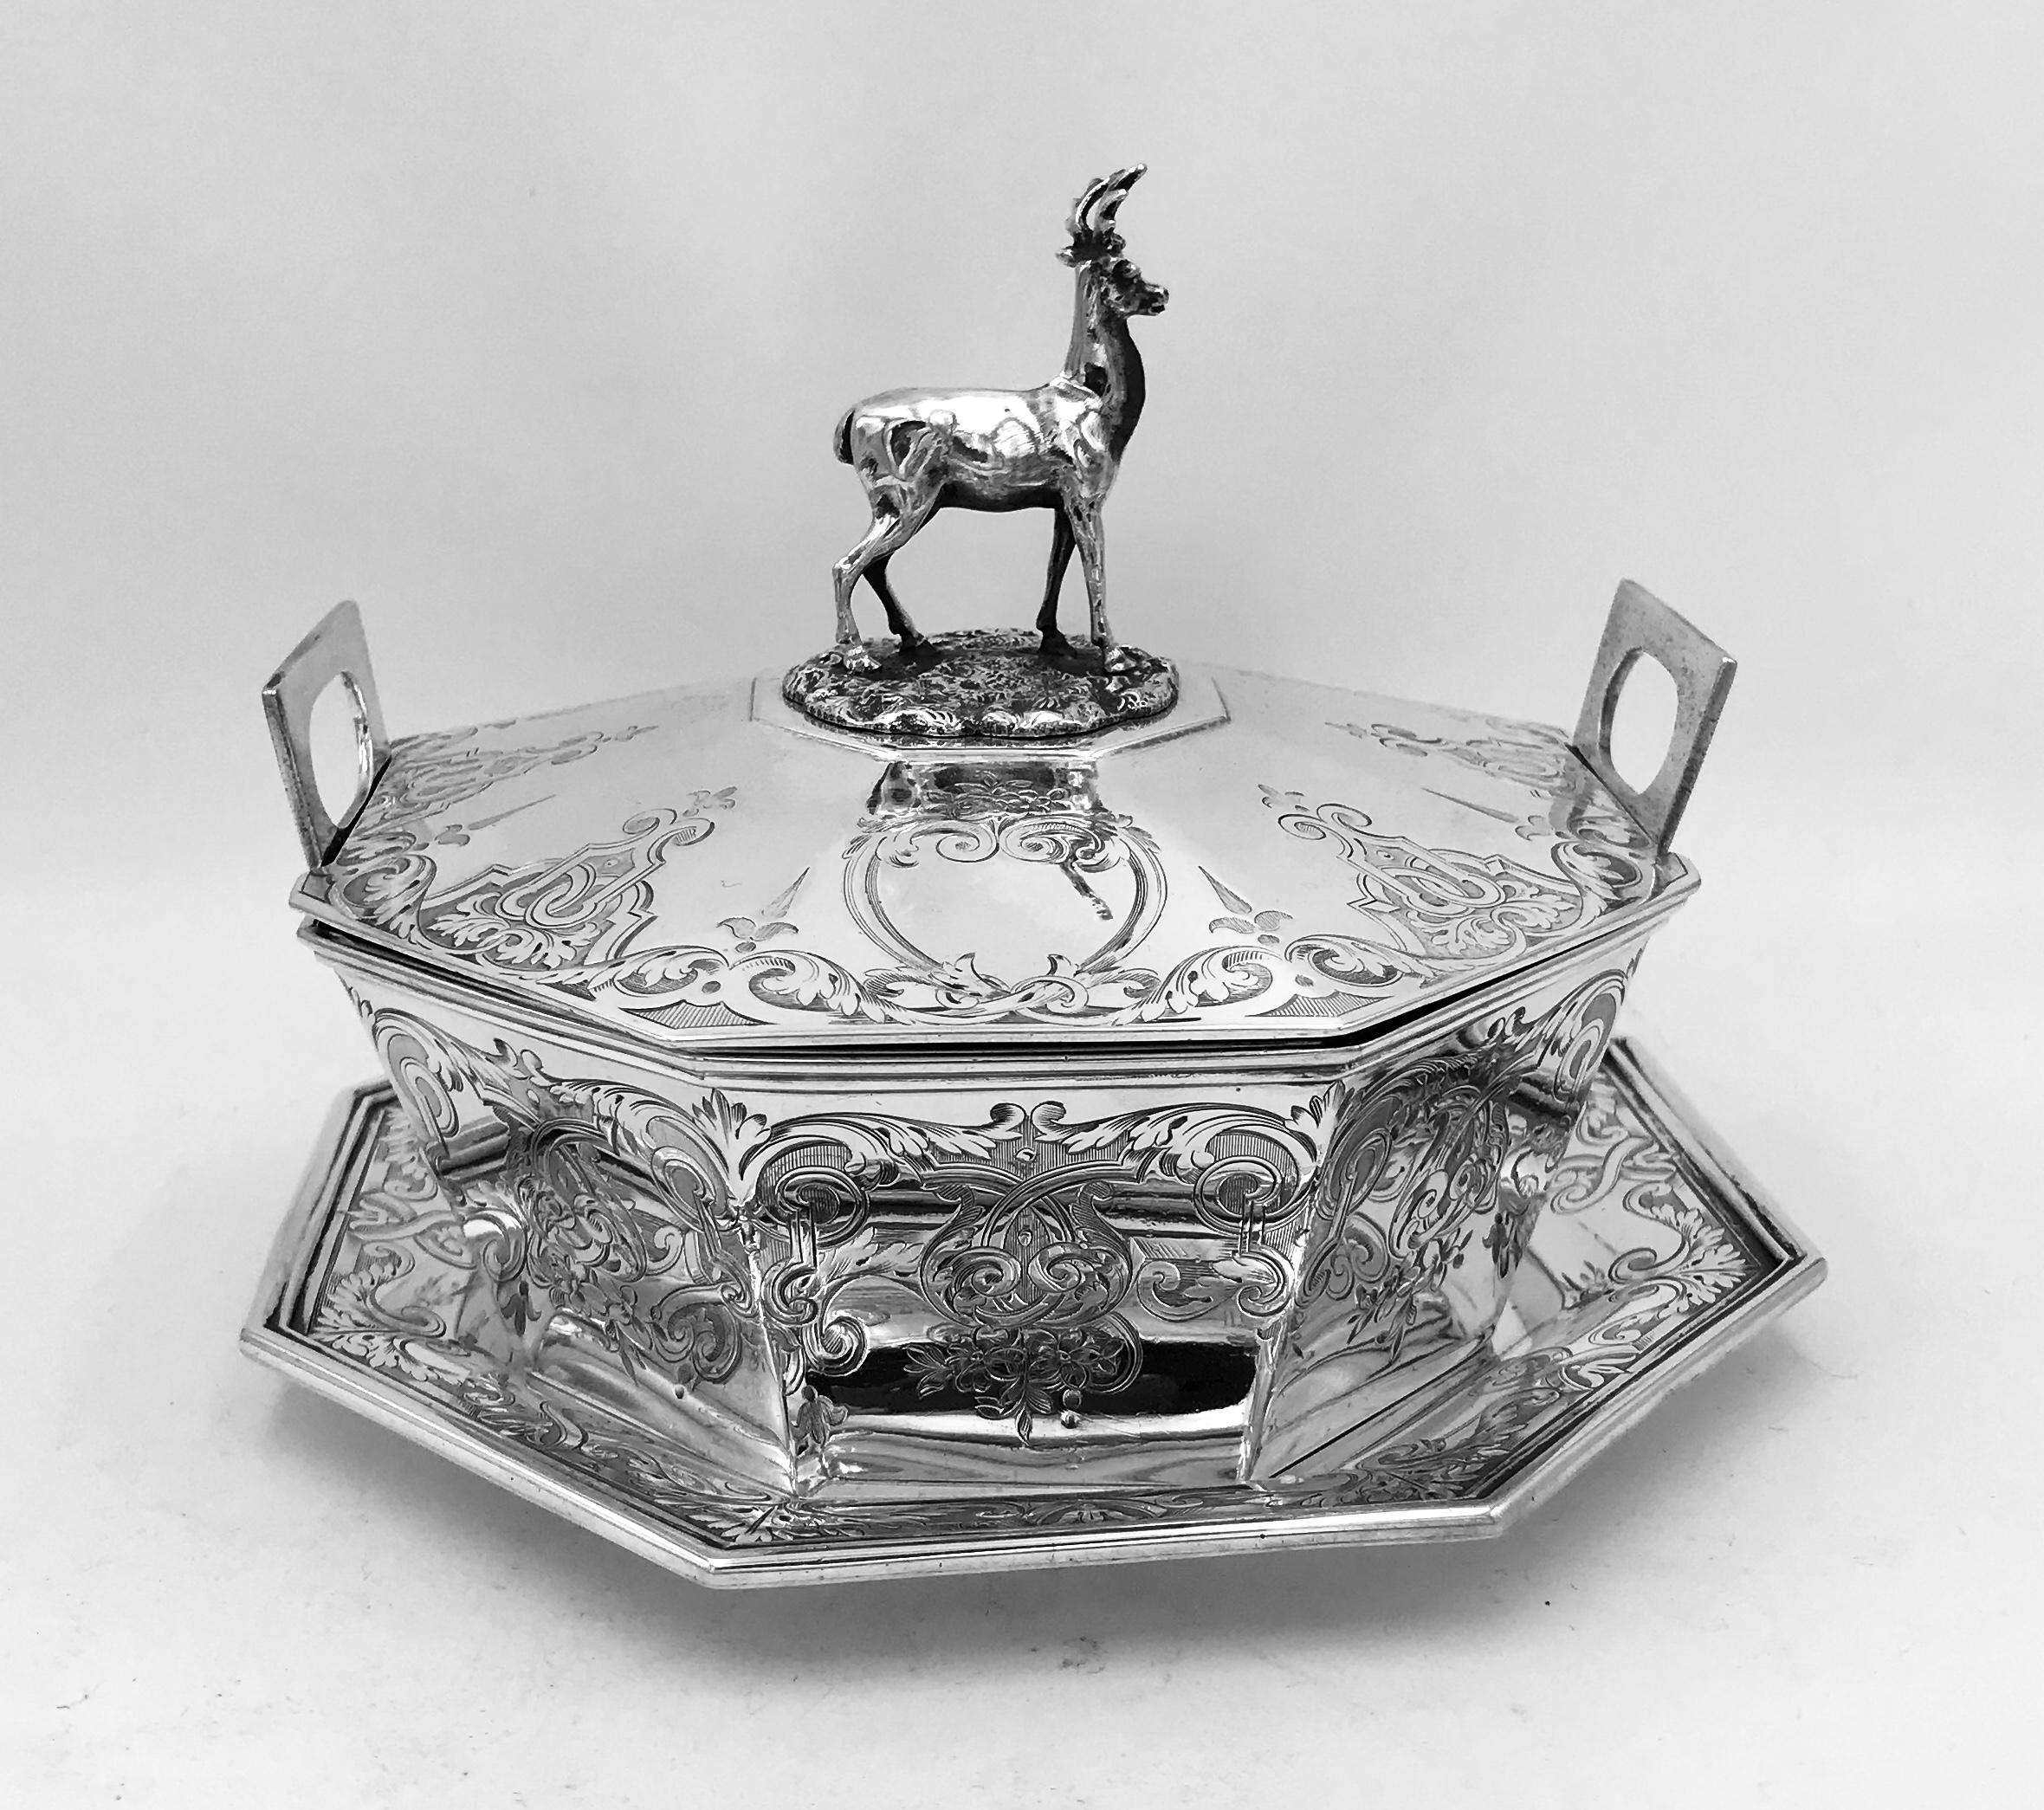 An English Victorian silver butter dish, cover and stand.
Beautifully engraved, this butter dish was made in London, 1855 by the famous Barnard Family.
The dish has a lovely stag finial on top.